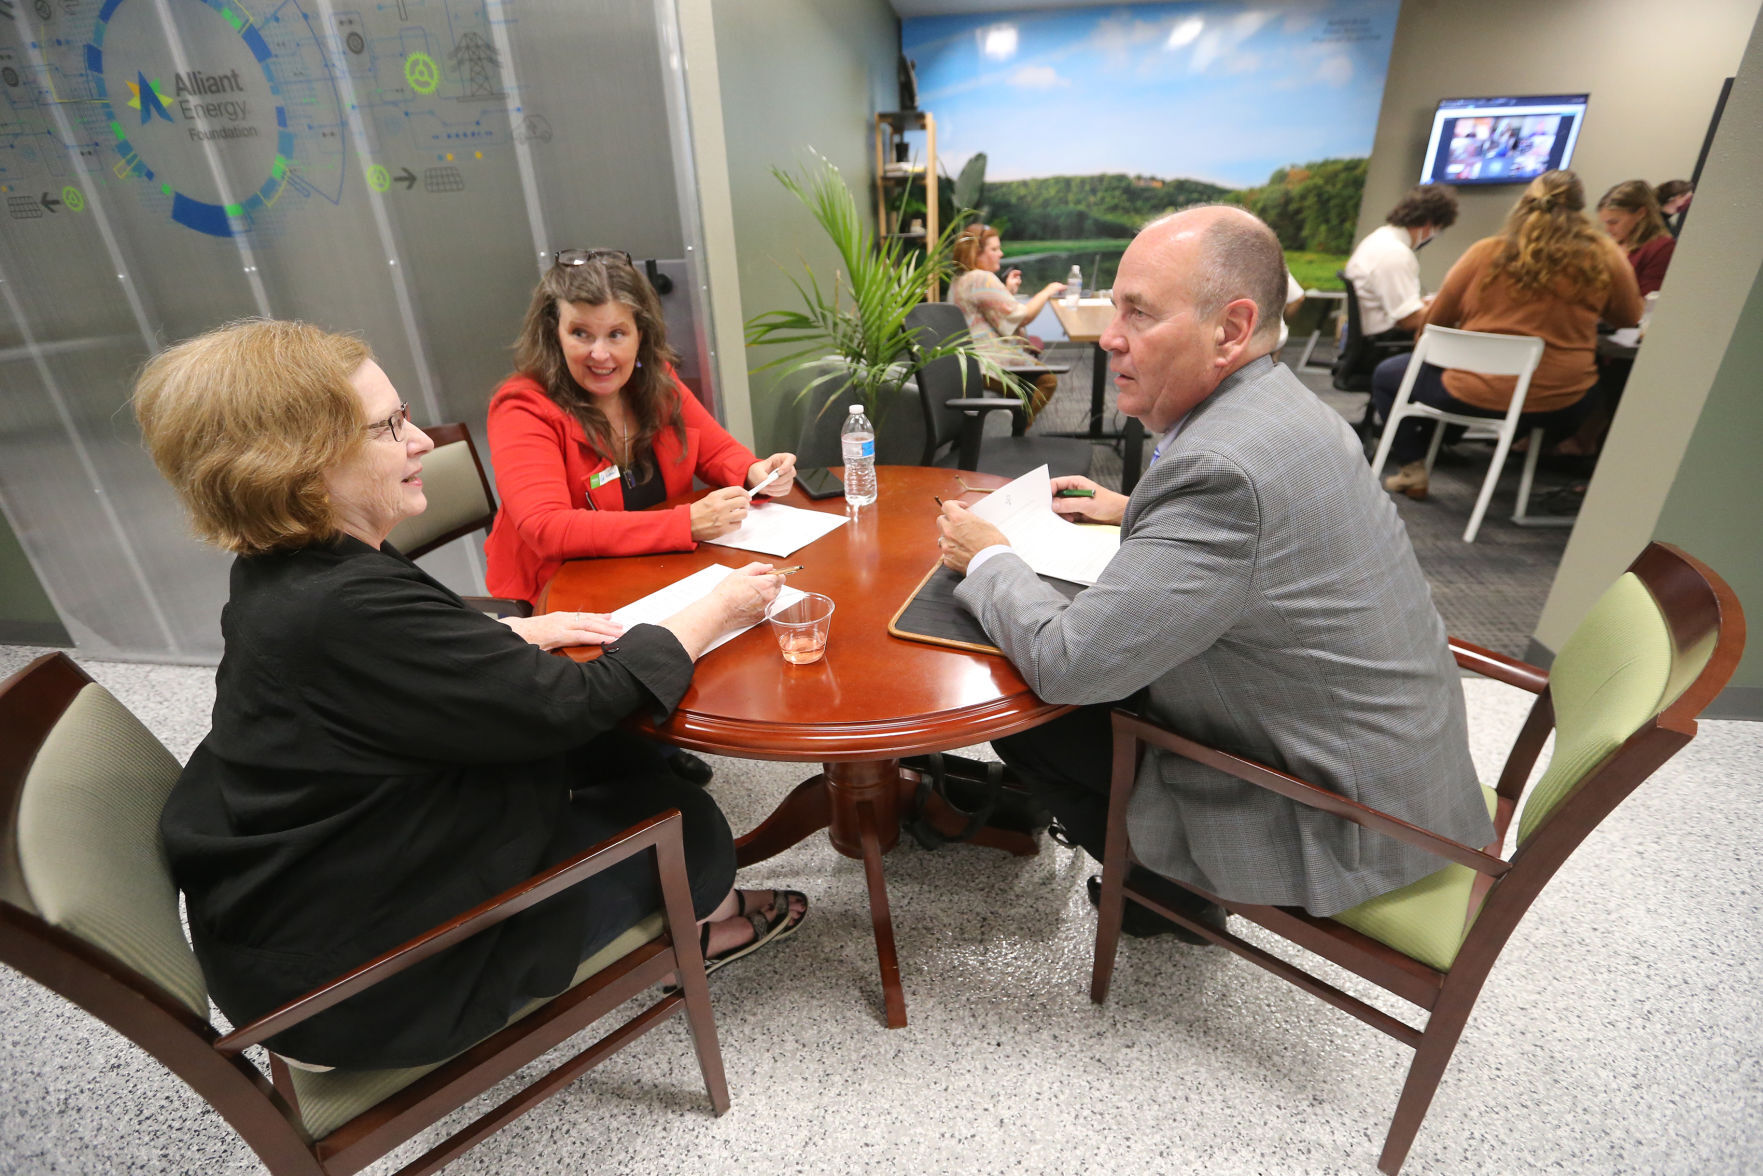 Cindy Martens (from left), Kate Koziol and George Krueger discuss ideas during the grand opening of the Innovation Driving Entrepreneurship Accelerator Hub, known as the IDEA Hub, at Platteville Business Incubator in Platteville, Wis., on Monday.    PHOTO CREDIT: JESSICA REILLY